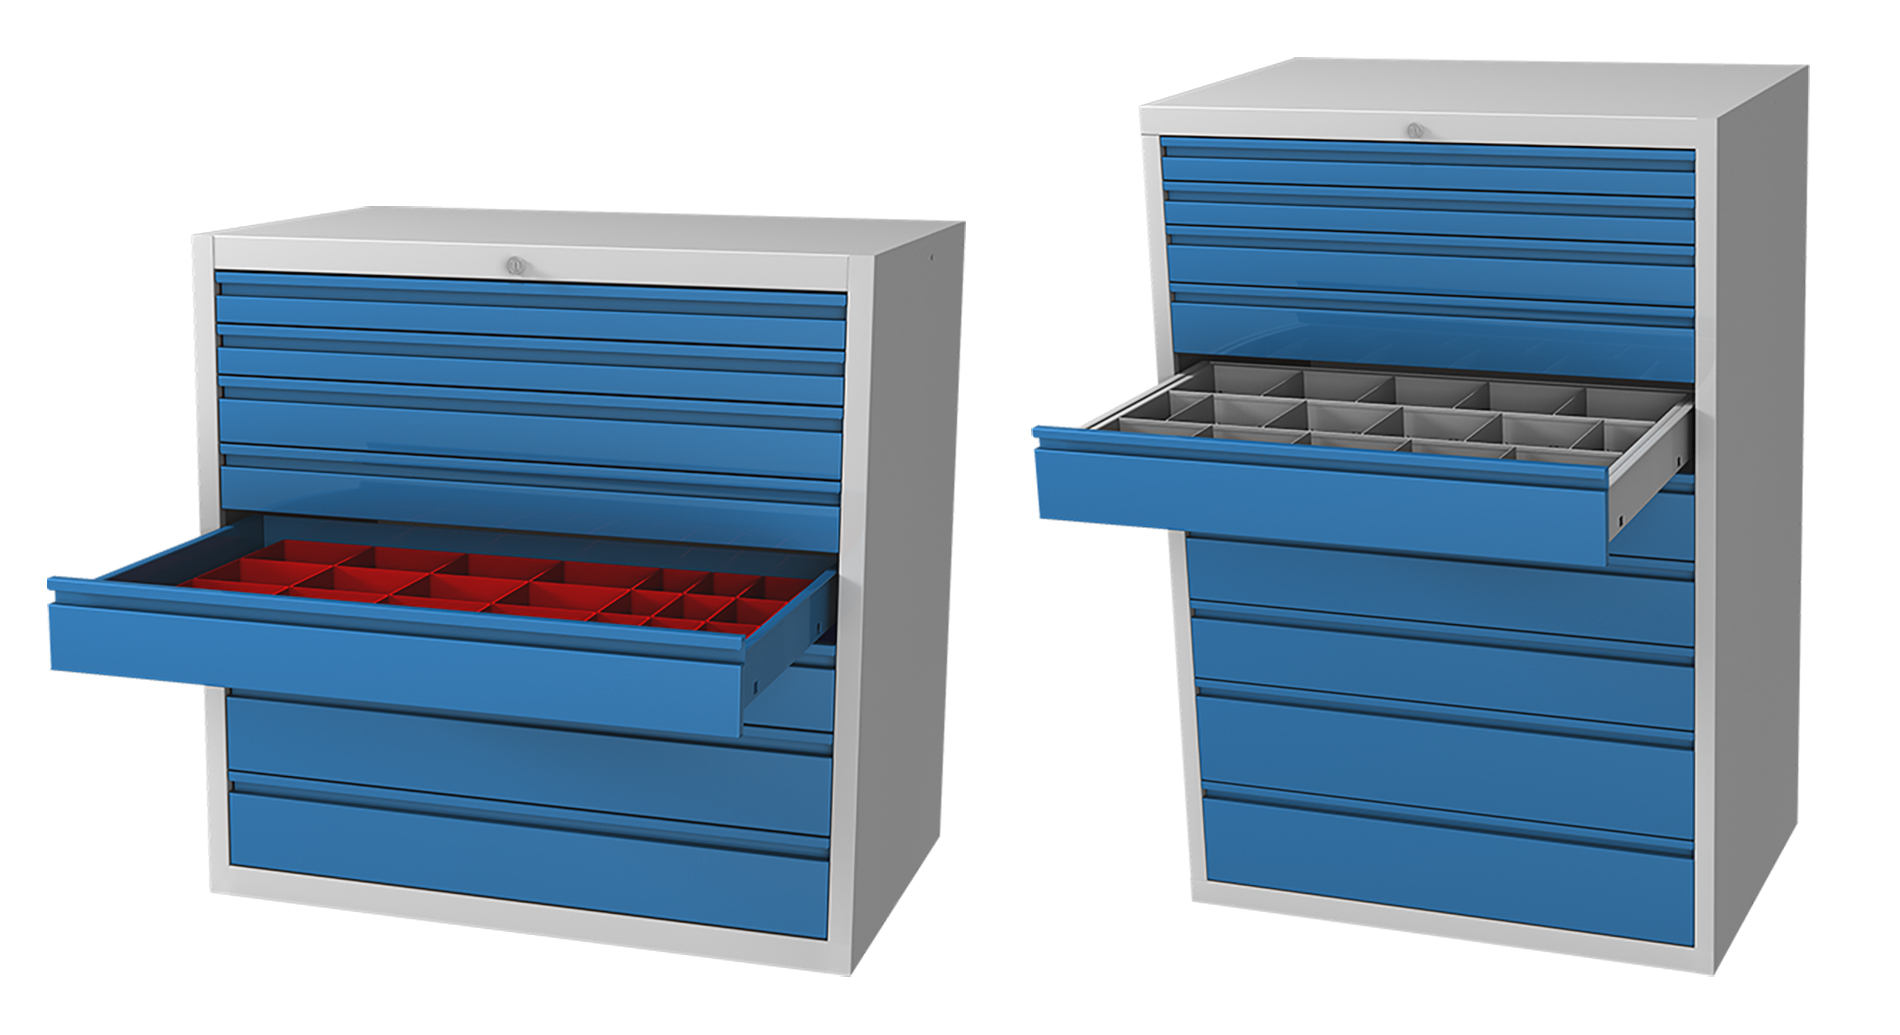 https://www.stow-group.com/sites/default/files/2019-11/cabinets-drawers.jpg